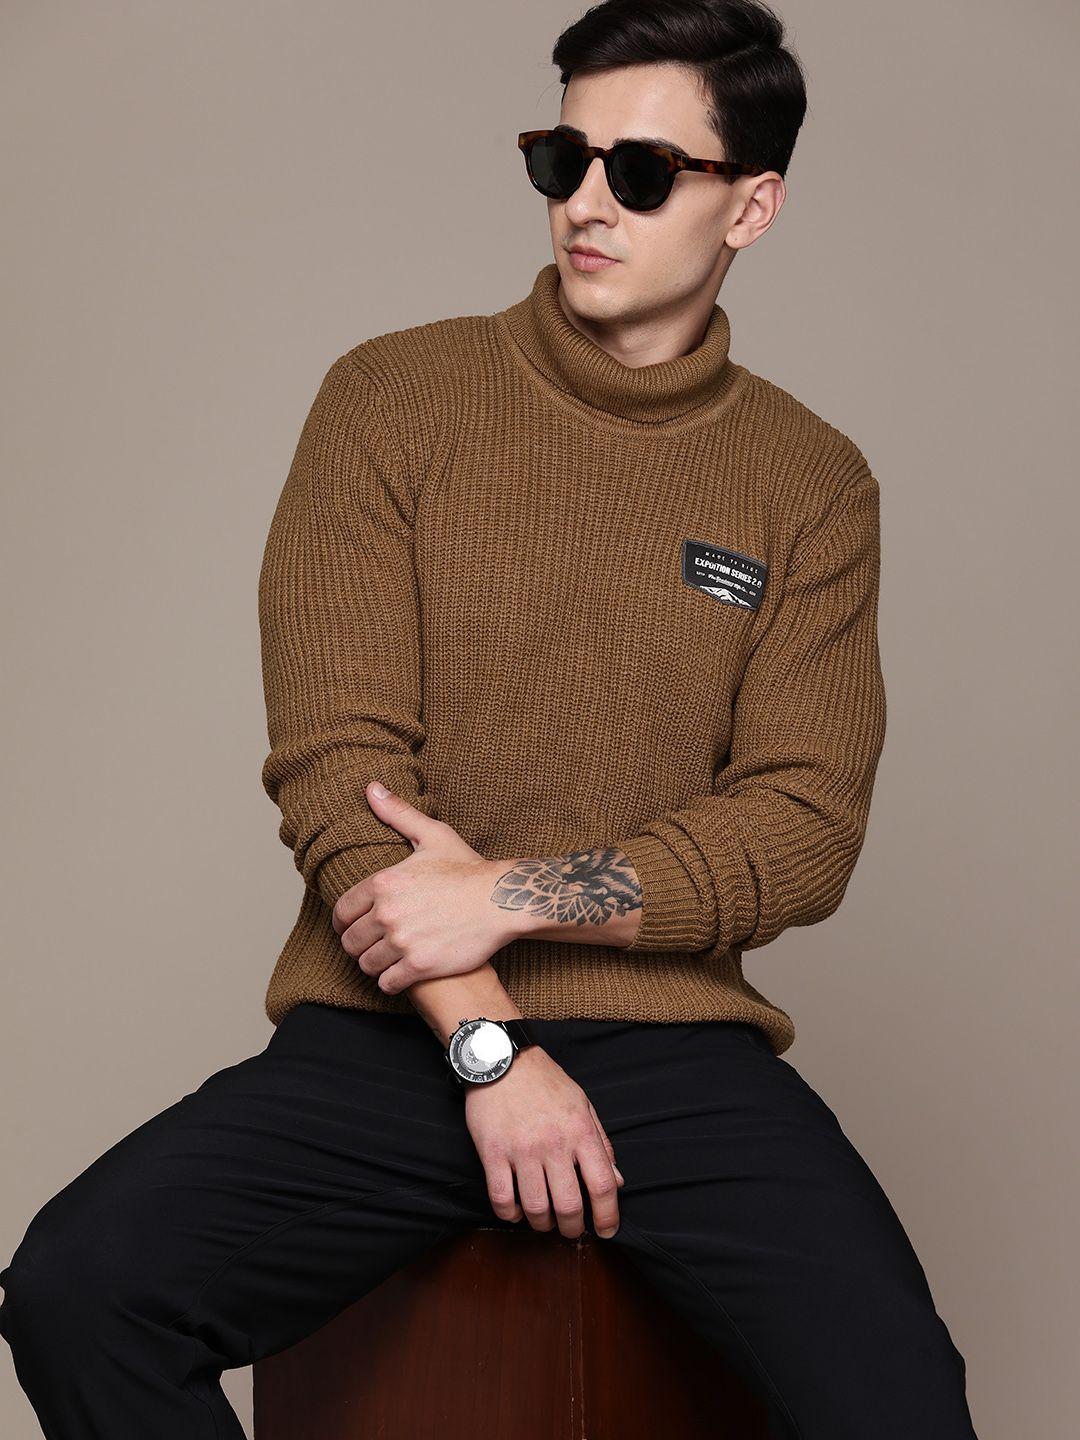 the roadster lifestyle co. turtle neck pullover